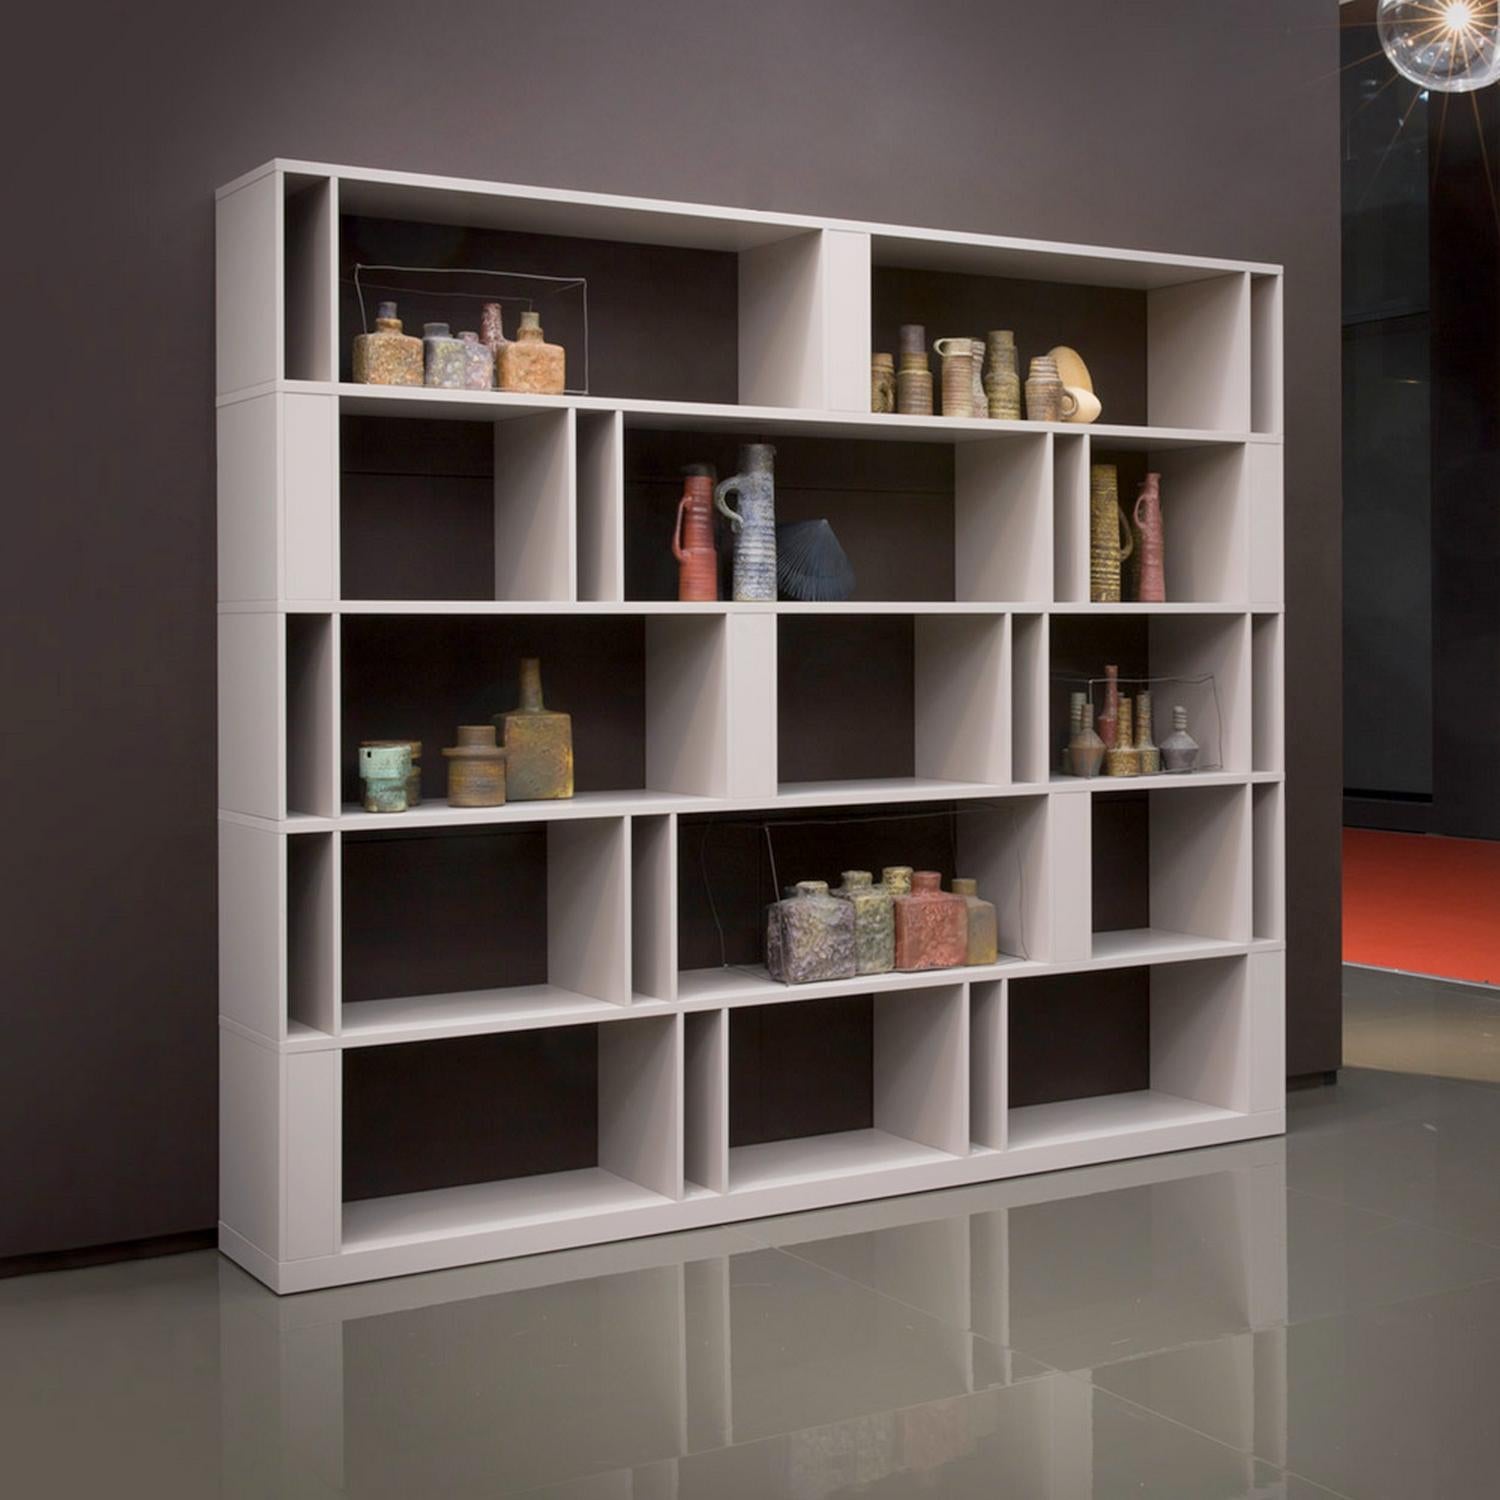 Modern In Stock in Los Angeles, White Brera Bookcase, by Lievore Altherr Molina